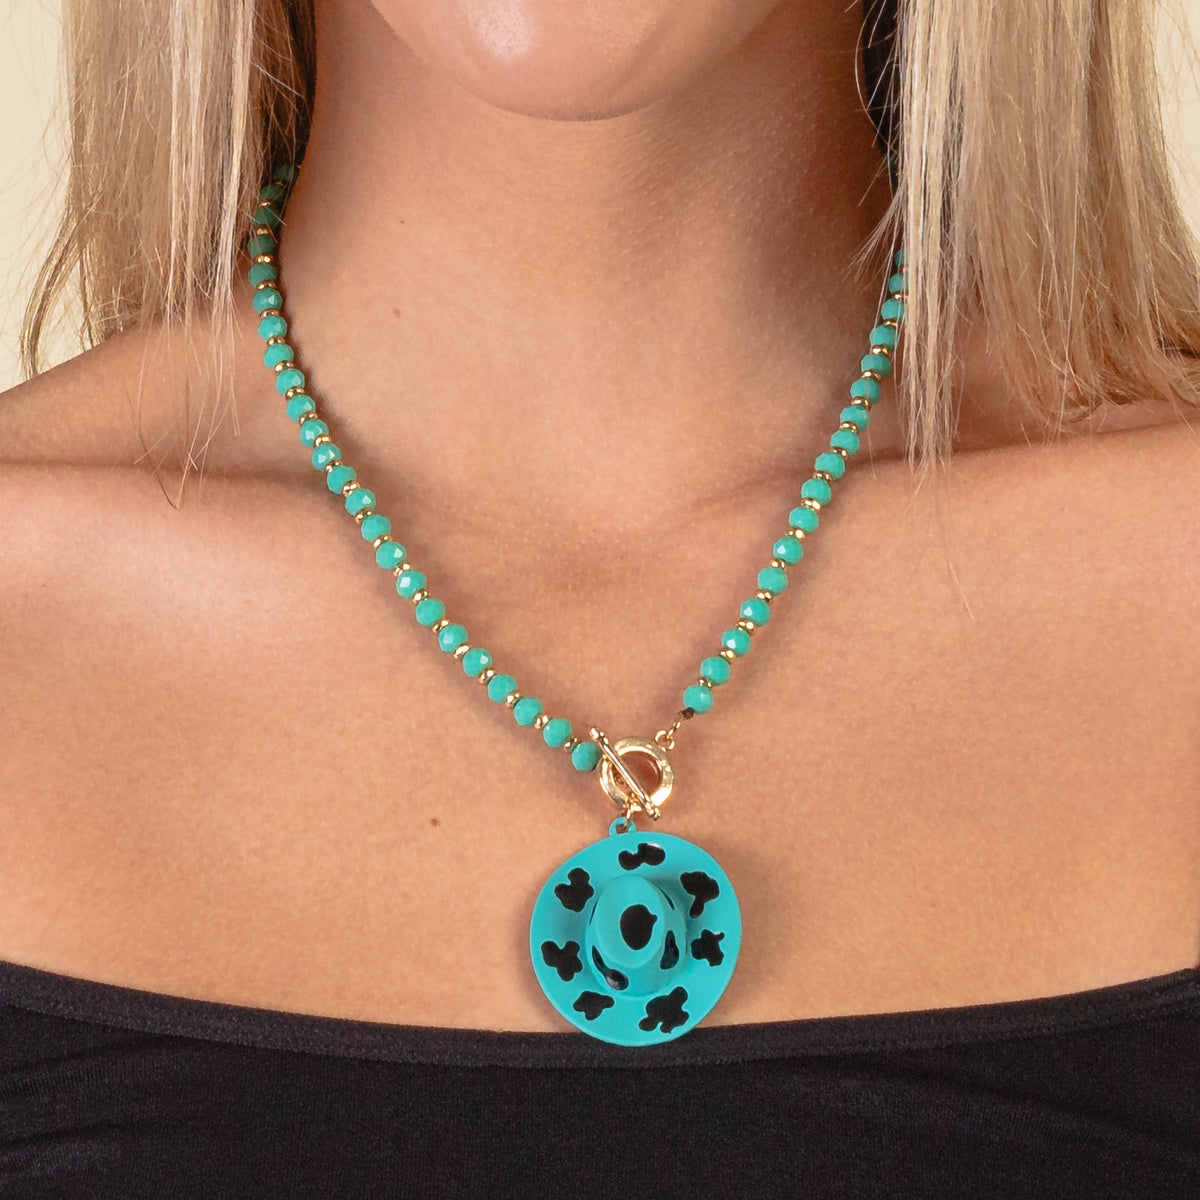 92019 - Western Cowboy Hat Necklace - Turquoise